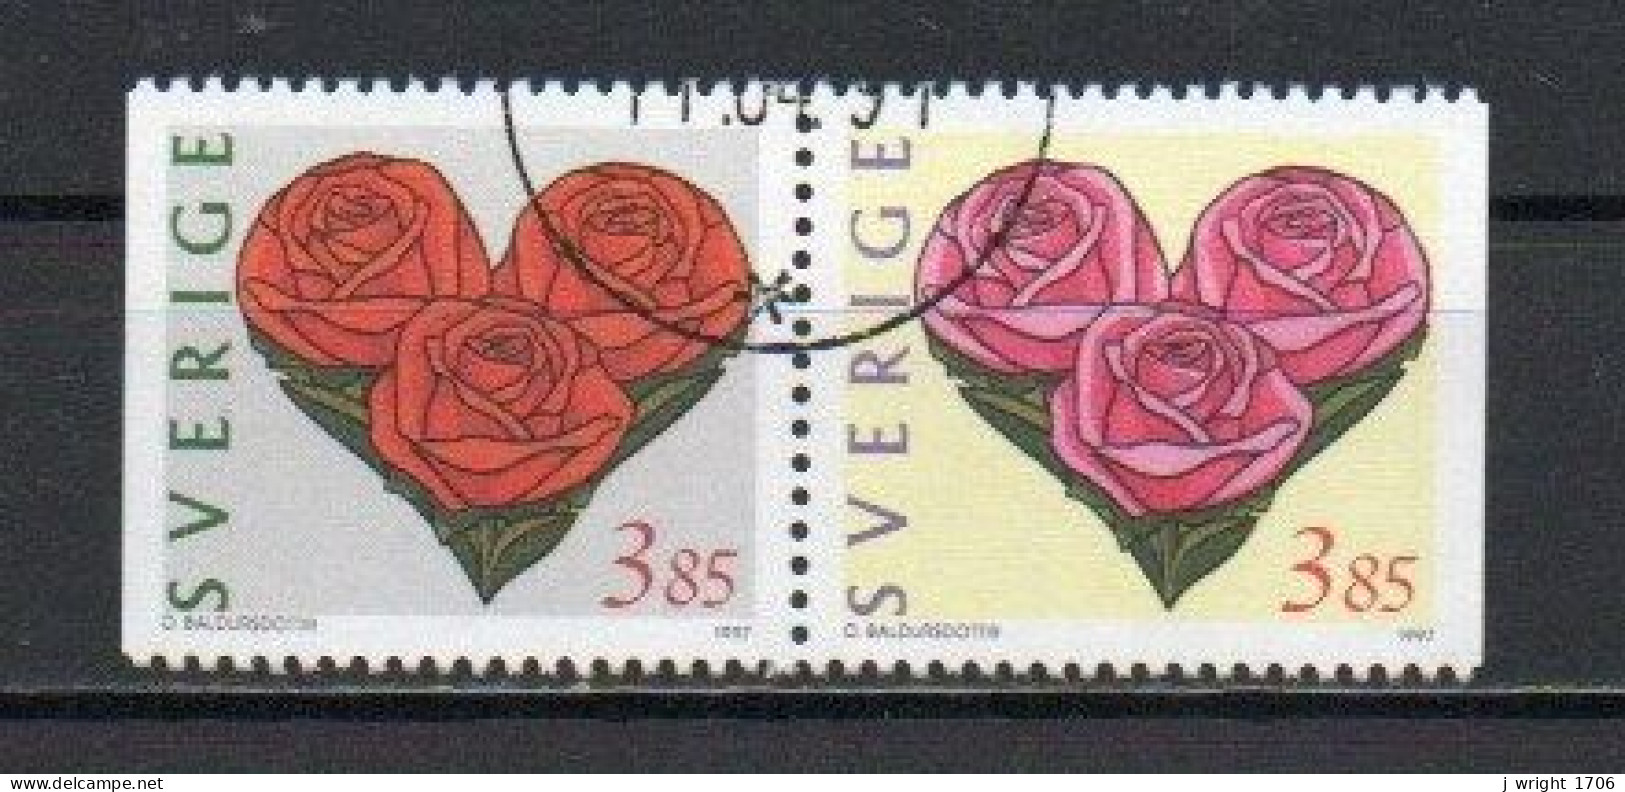 Sweden, 1997, Greetings Stamps, Set/Joined Pair, USED - Gebraucht